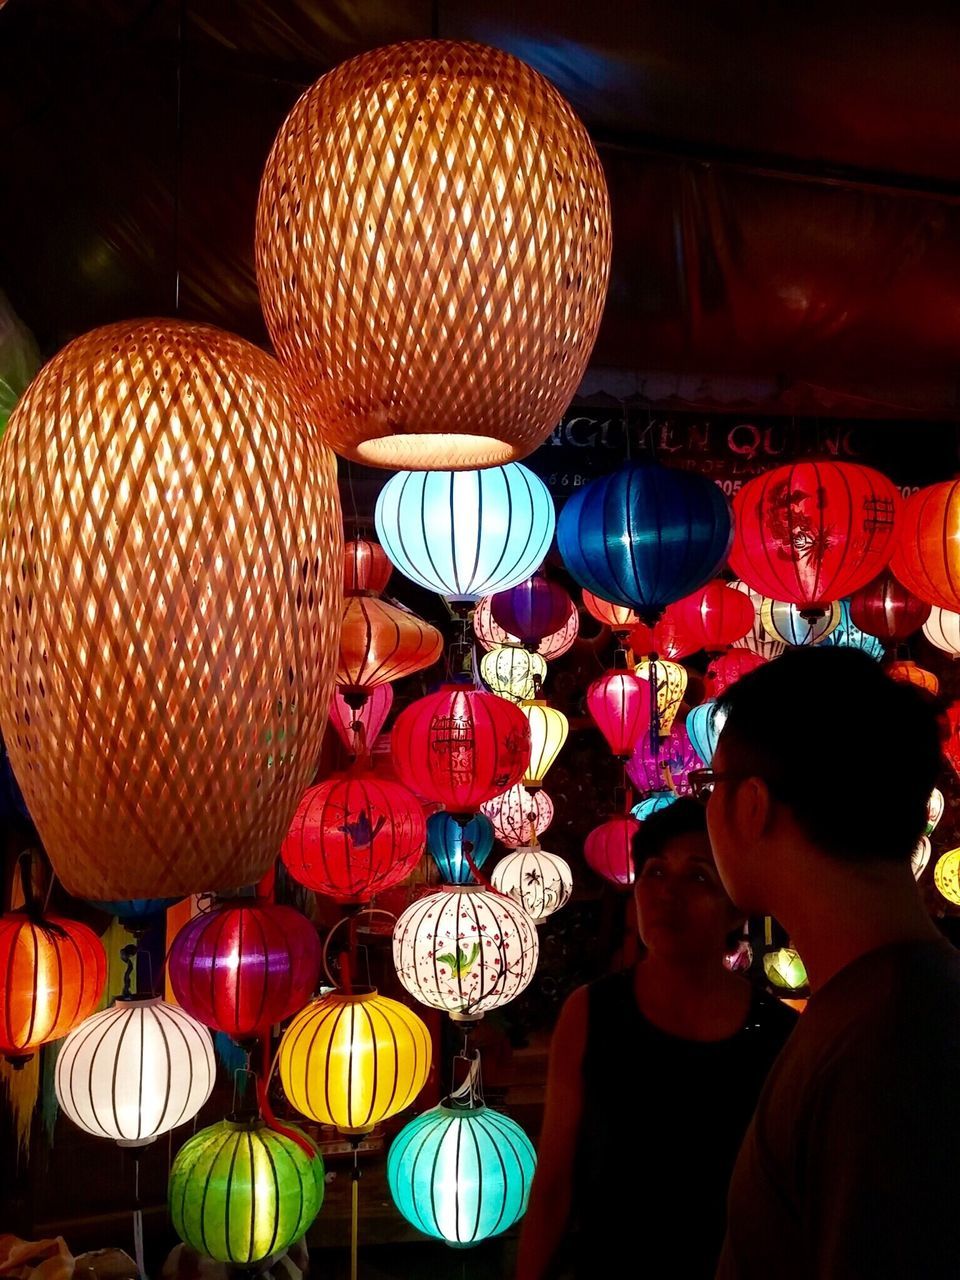 illuminated, indoors, lighting equipment, celebration, night, leisure activity, decoration, lifestyles, lantern, hanging, multi colored, ceiling, cultures, tradition, traditional festival, balloon, men, in a row, arts culture and entertainment